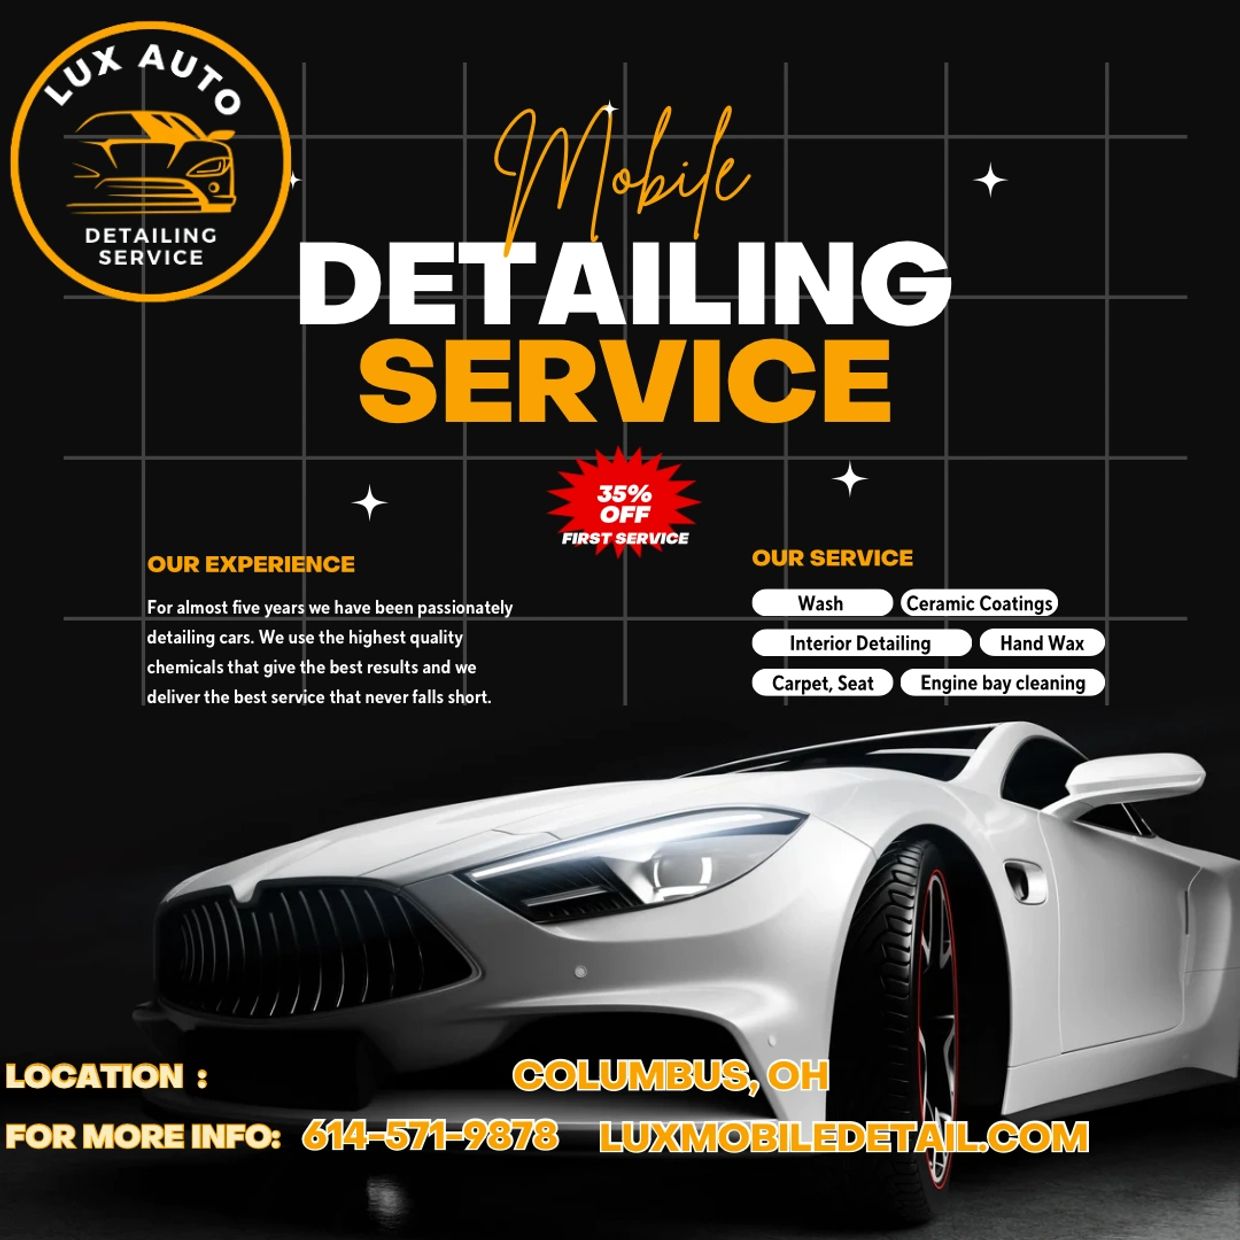 Mobile Auto Detailing Service Ceramic Coating Wash and Wax